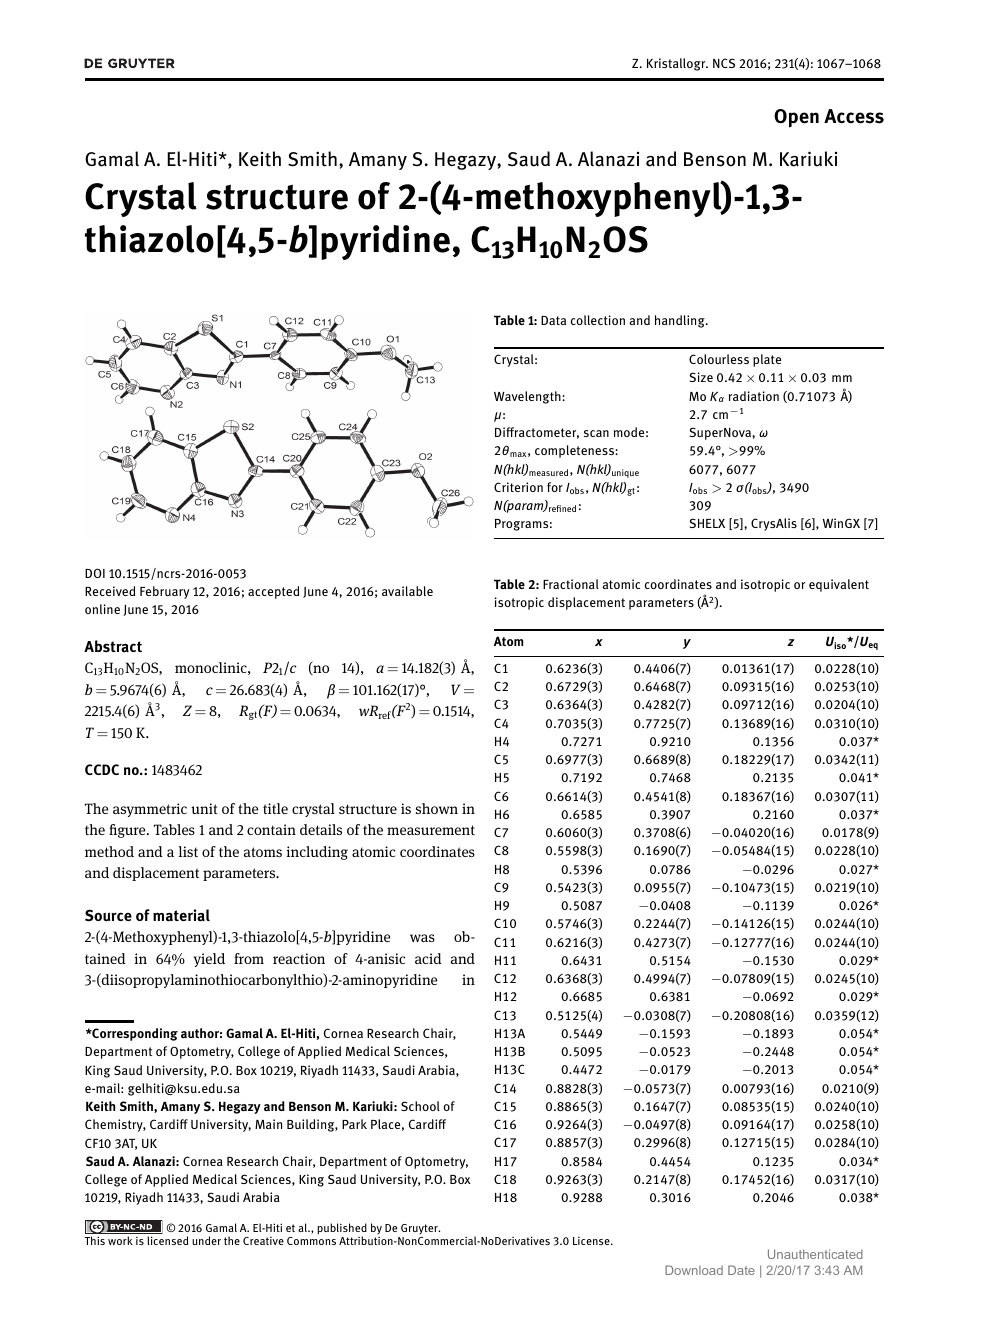 Crystal Structure Of 2 4 Methoxyphenyl 1 3 Thiazolo 4 5 B Pyridine C13h10n2os Topic Of Research Paper In Chemical Sciences Download Scholarly Article Pdf And Read For Free On Cyberleninka Open Science Hub